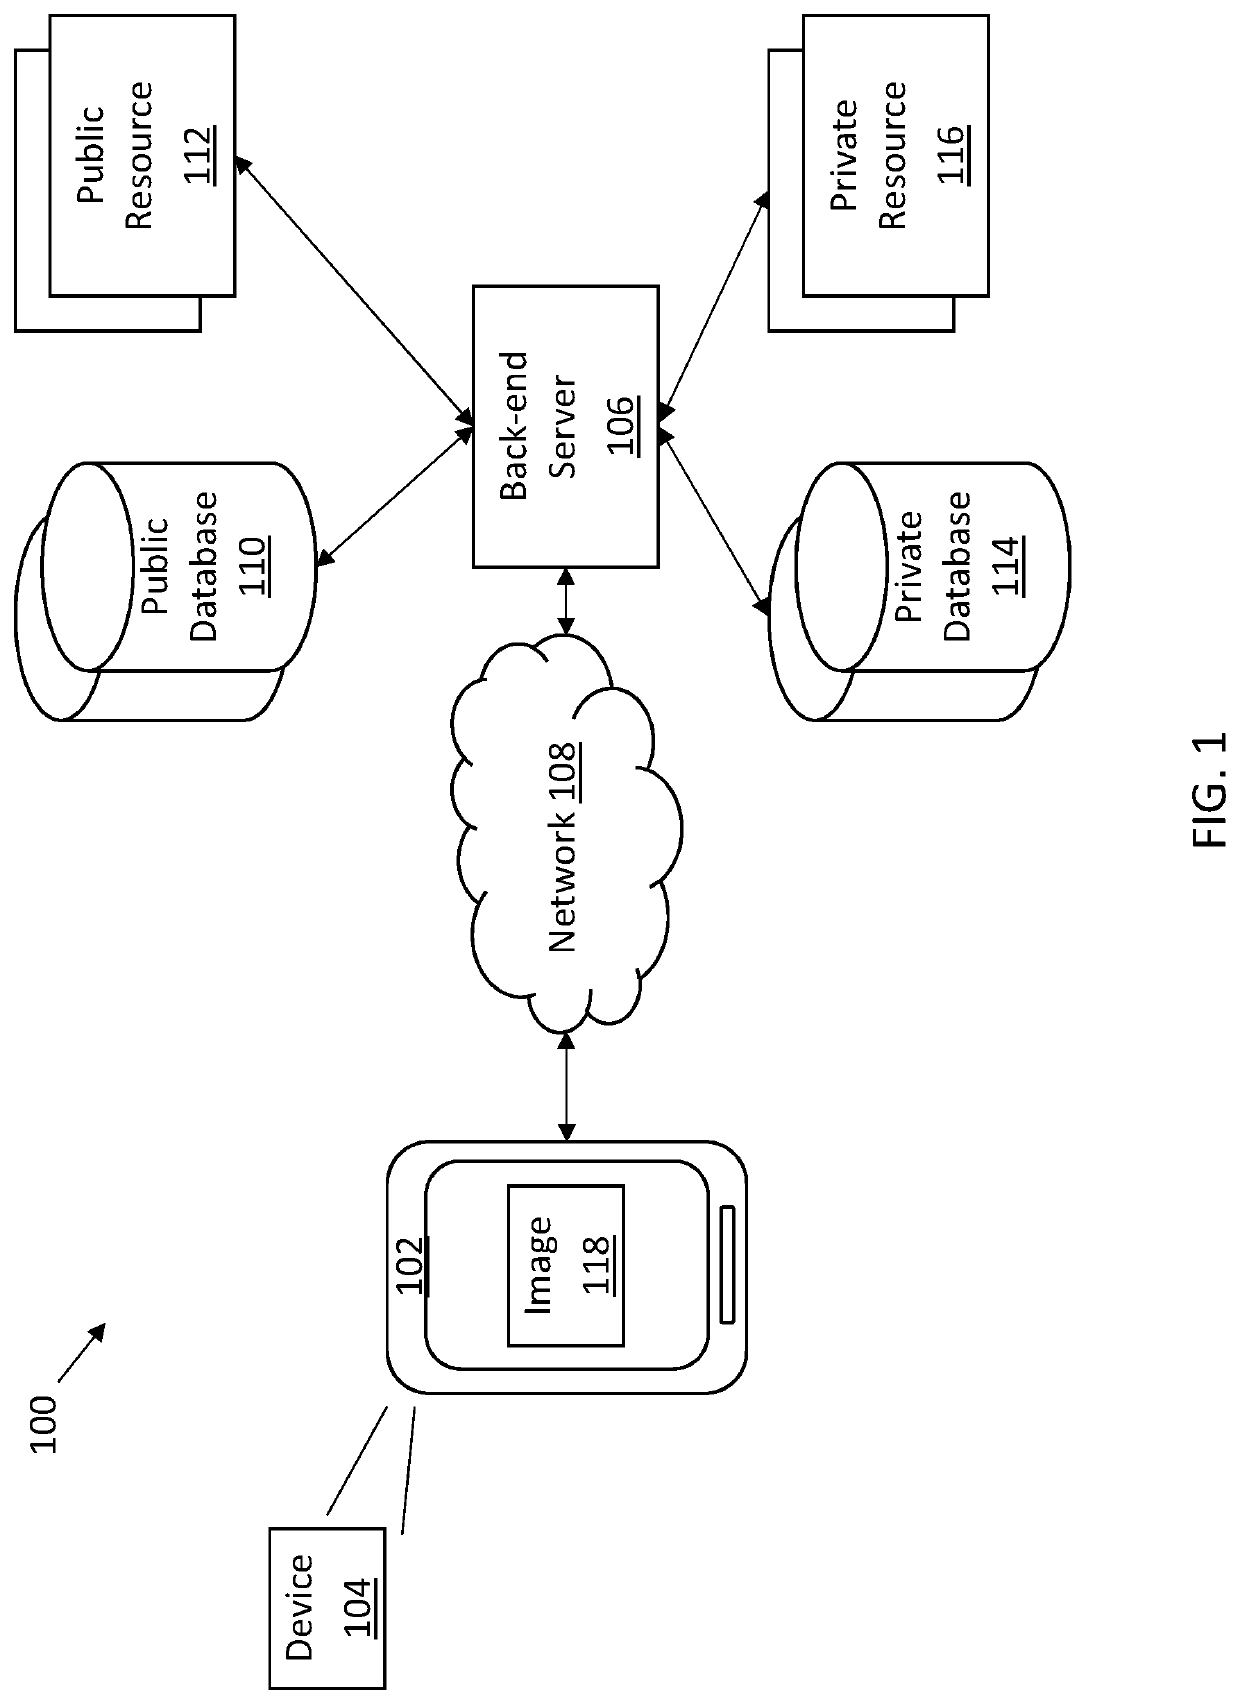 Methods and apparatus for managing telecommunication system devices